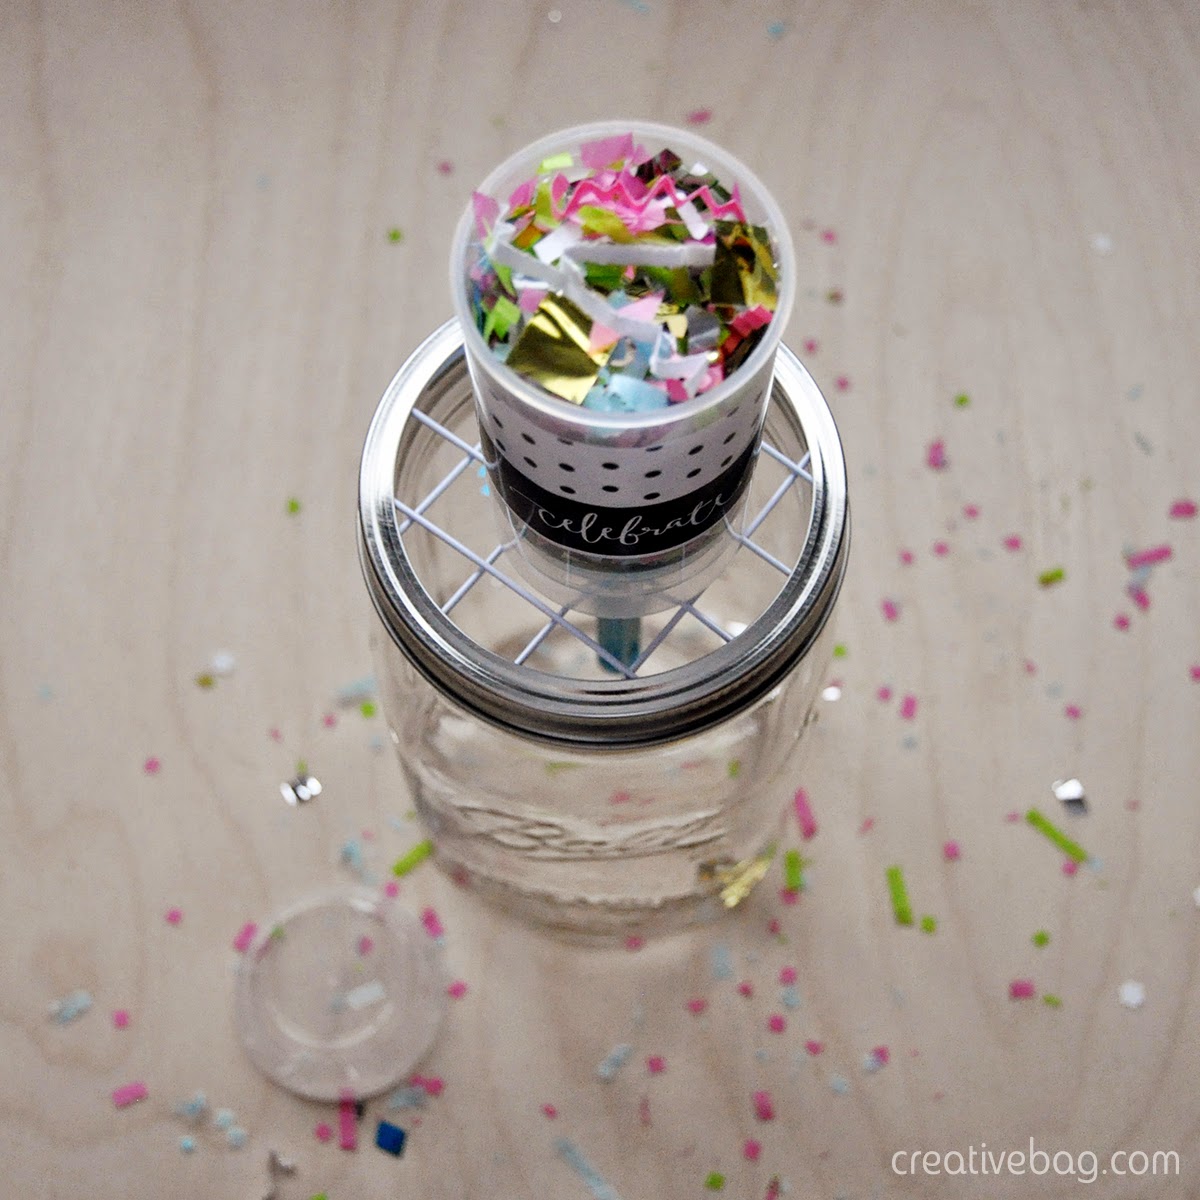 diy confetti poppers and make your own confetti | Creative Bag